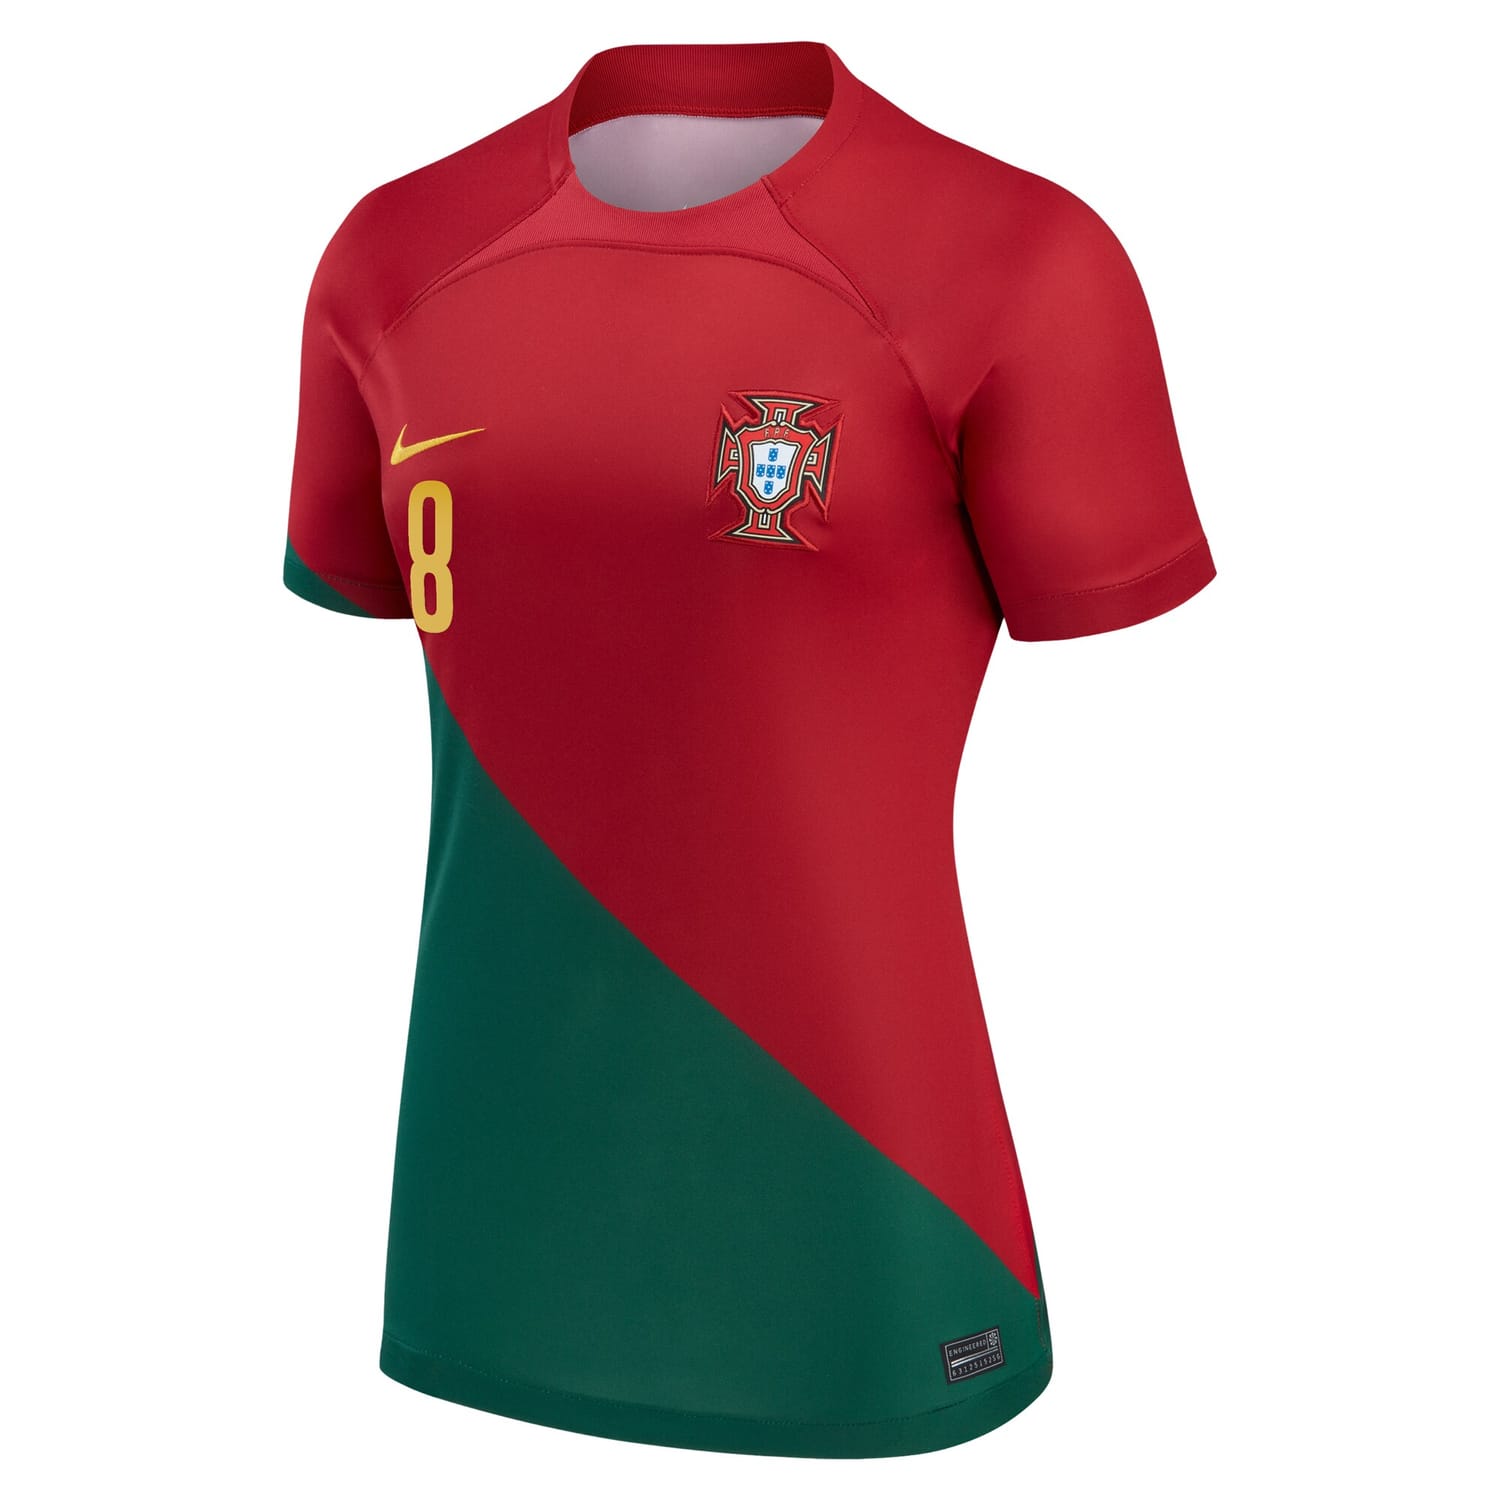 Portugal National Team Home Jersey Shirt Red 2022-23 player Bruno Fernandes printing for Women